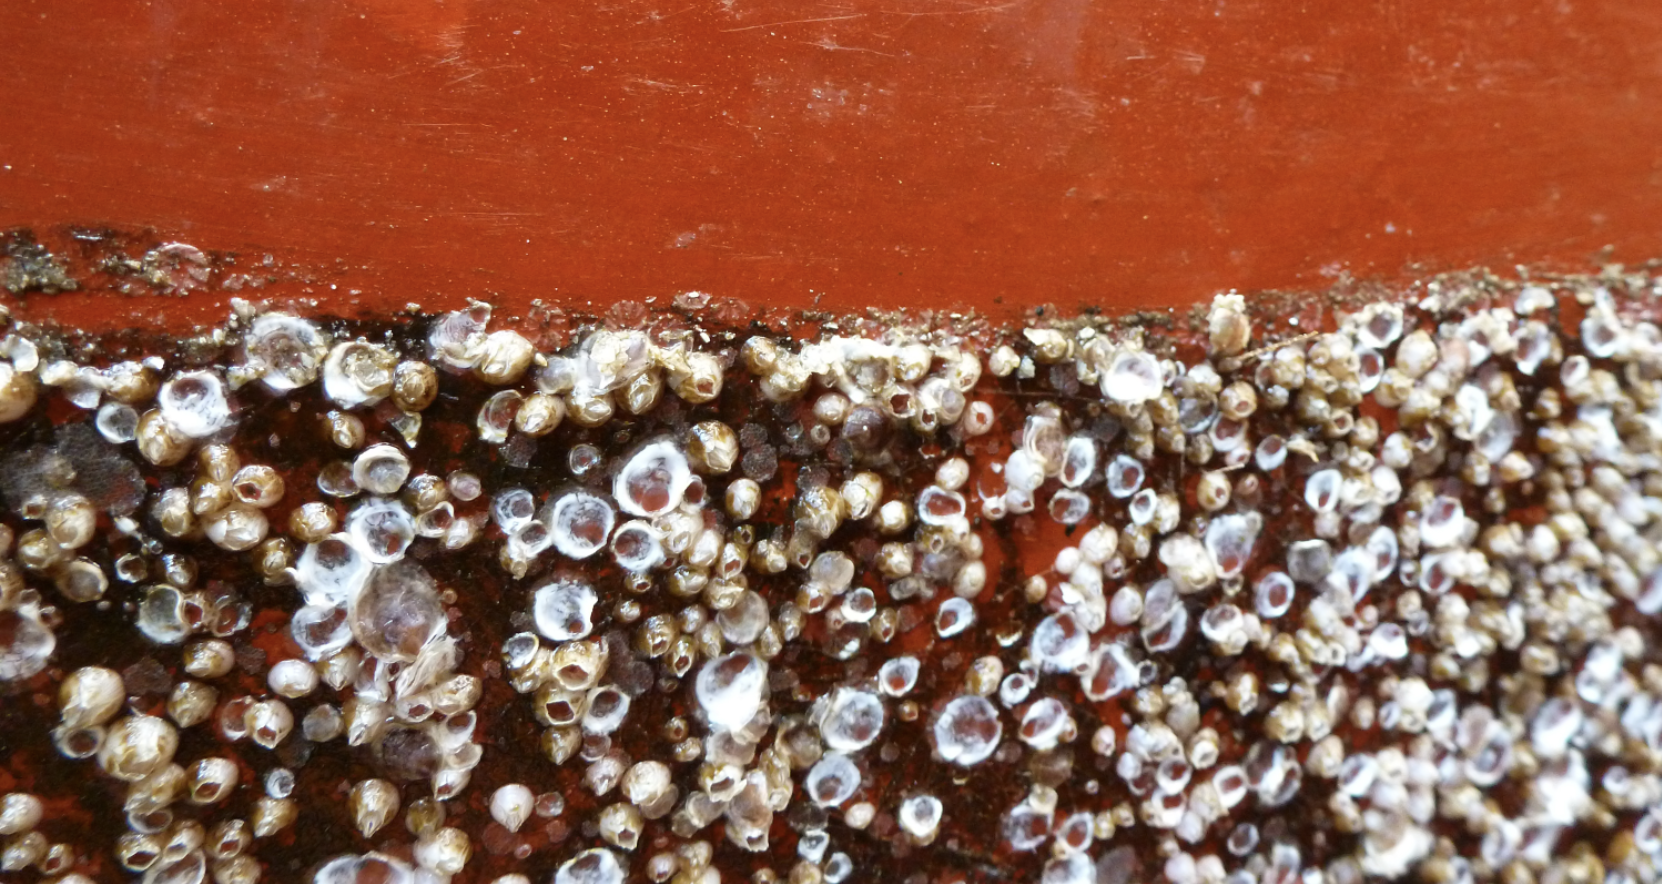 a dense mat of barnacles covers a red boat hull